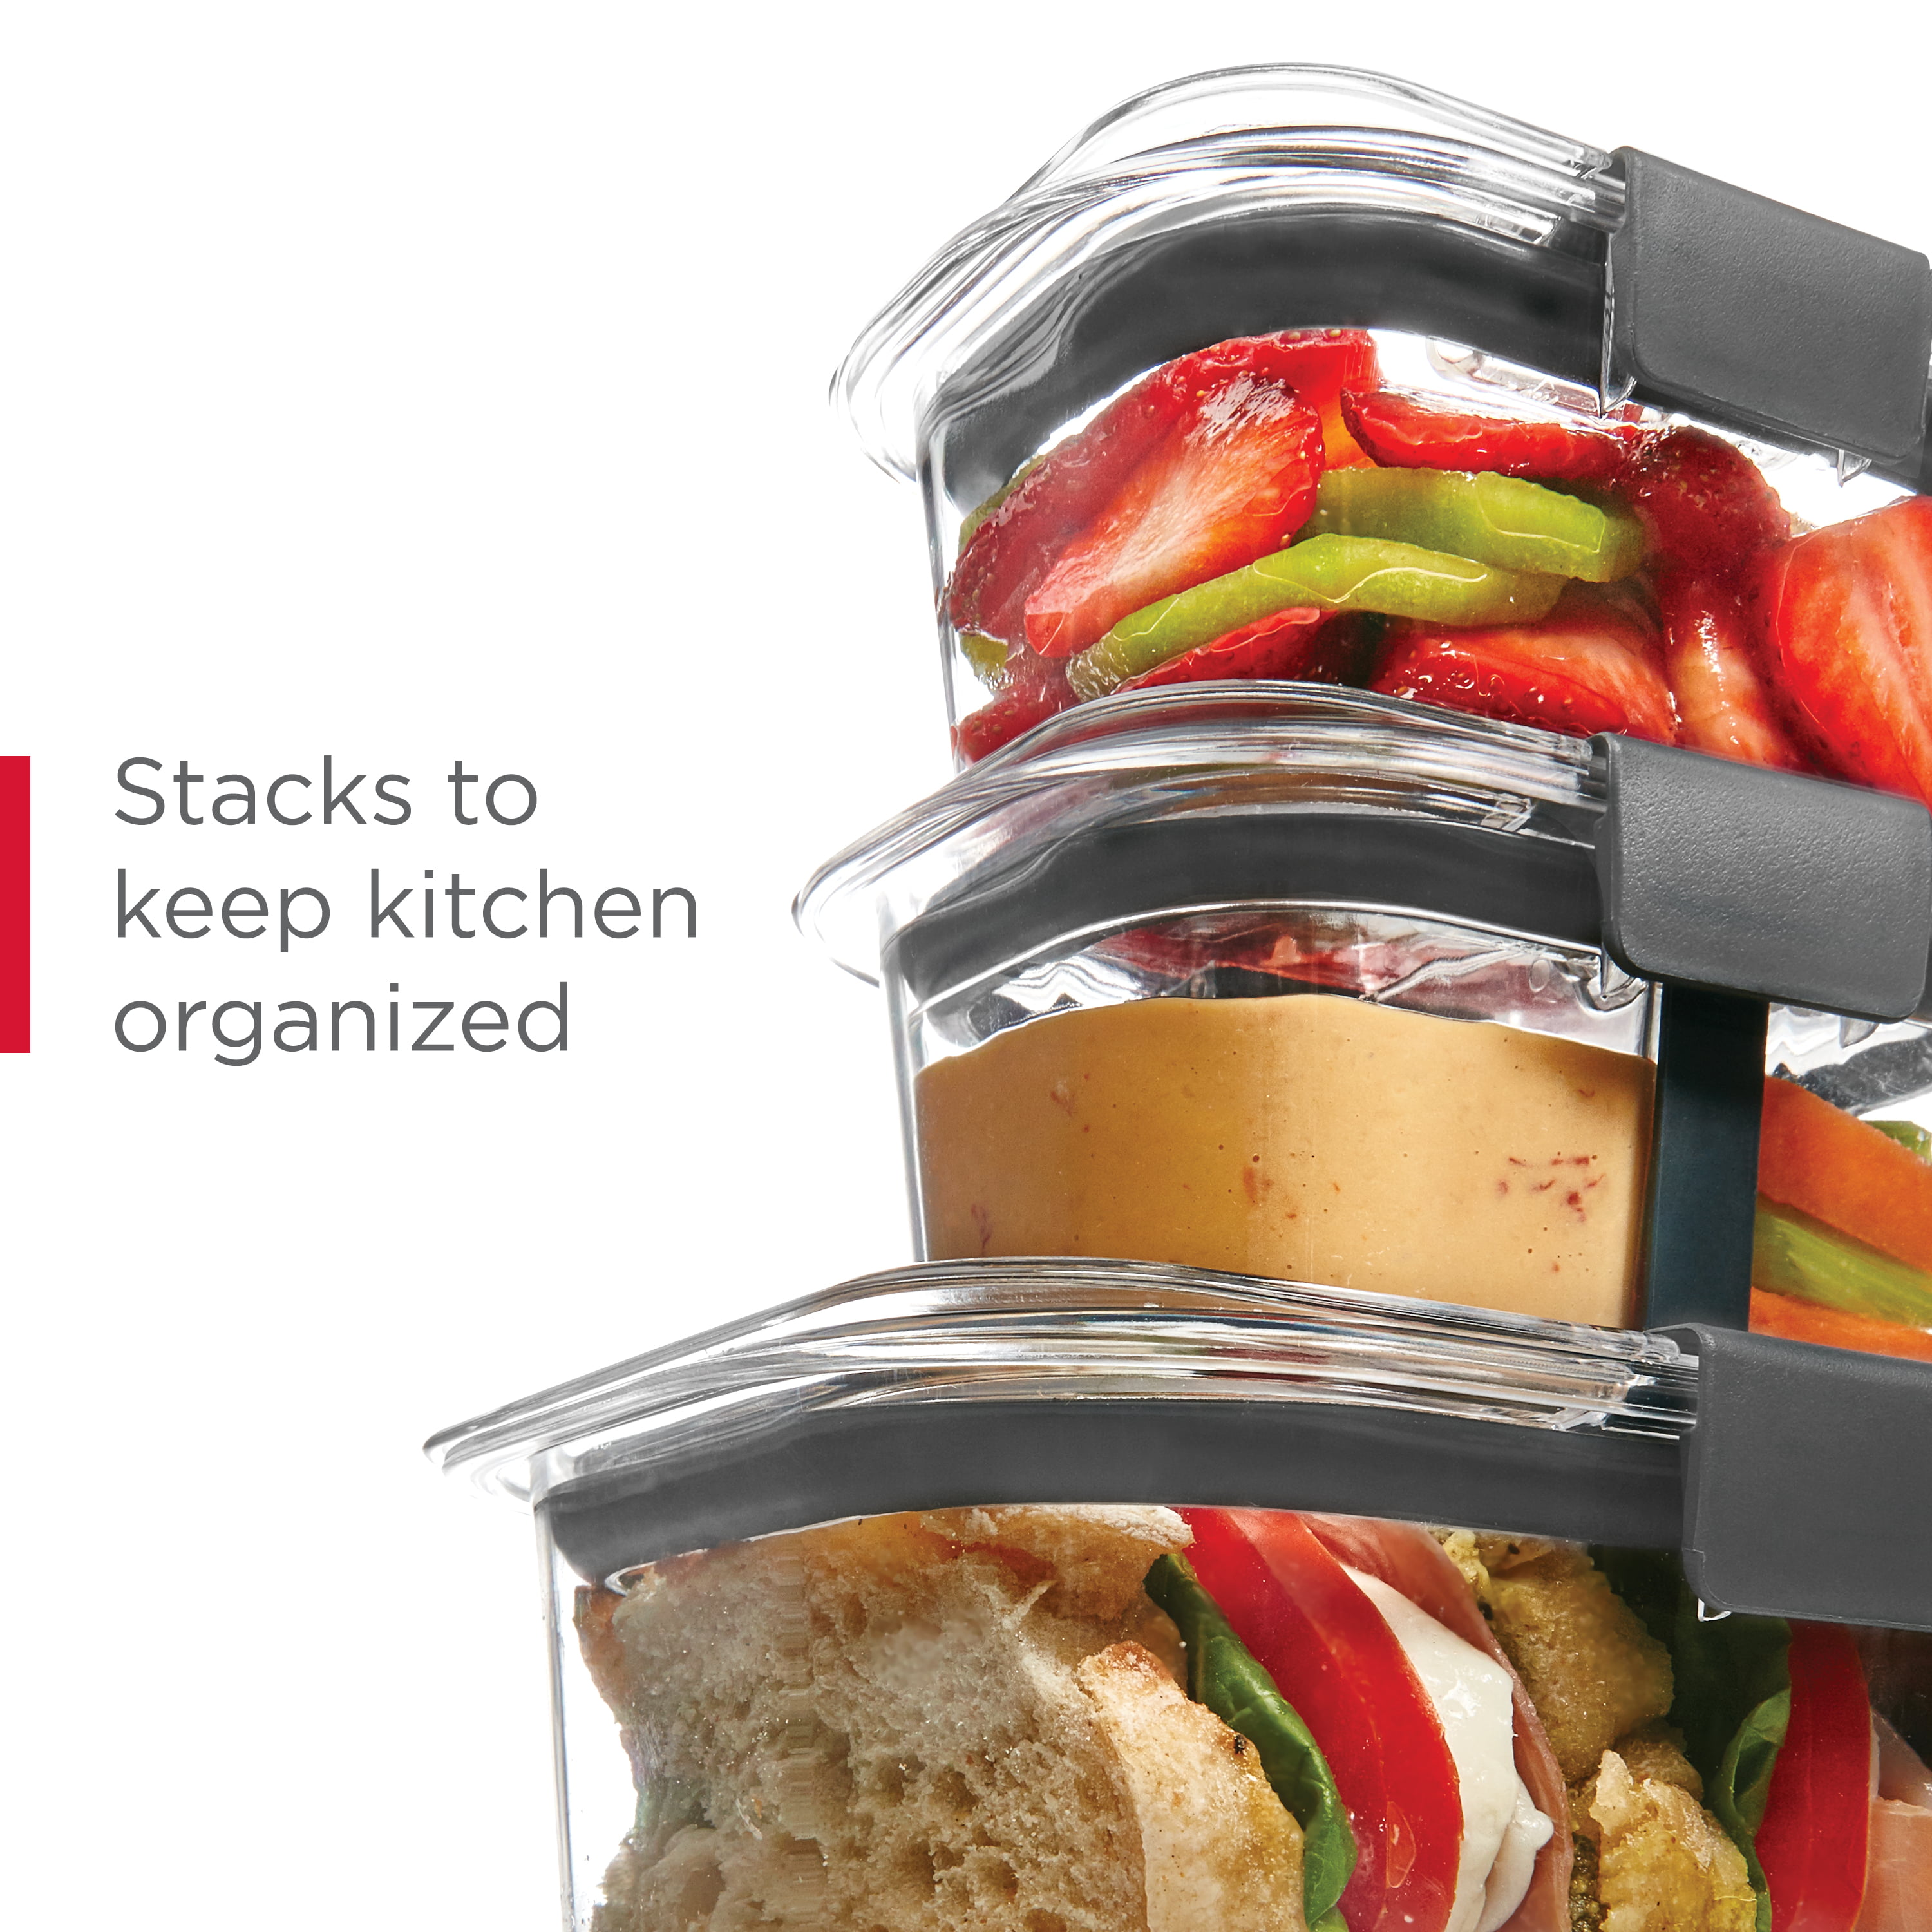 Rubbermaid Brilliance Food Storage Container 10-Piece Set Only $16.29  (Regularly $23)